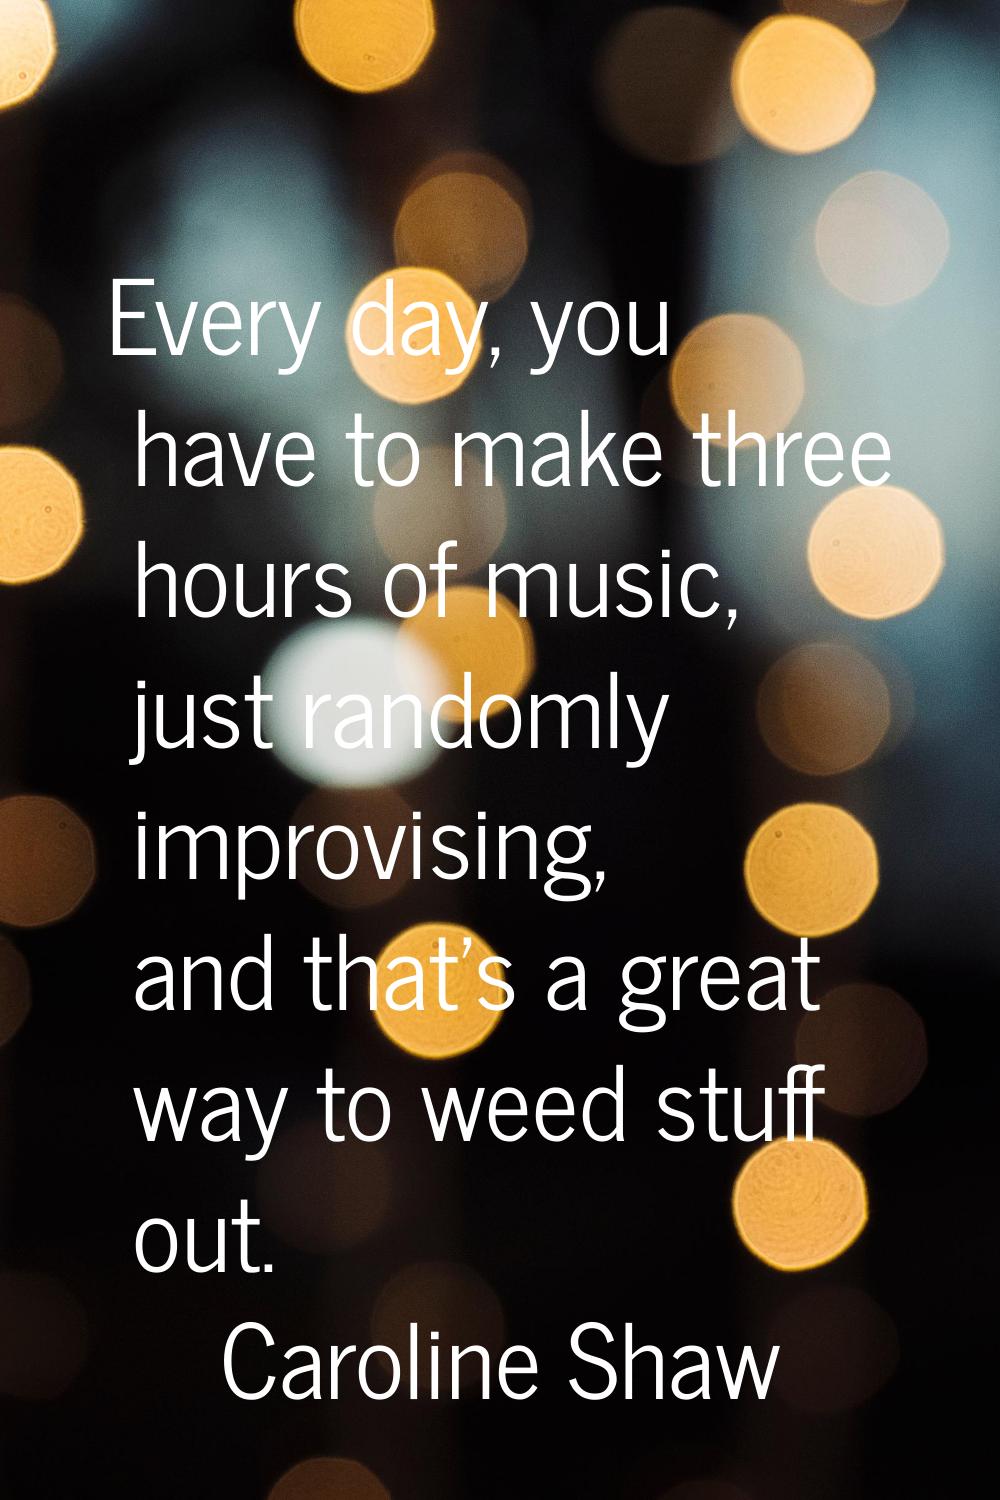 Every day, you have to make three hours of music, just randomly improvising, and that's a great way